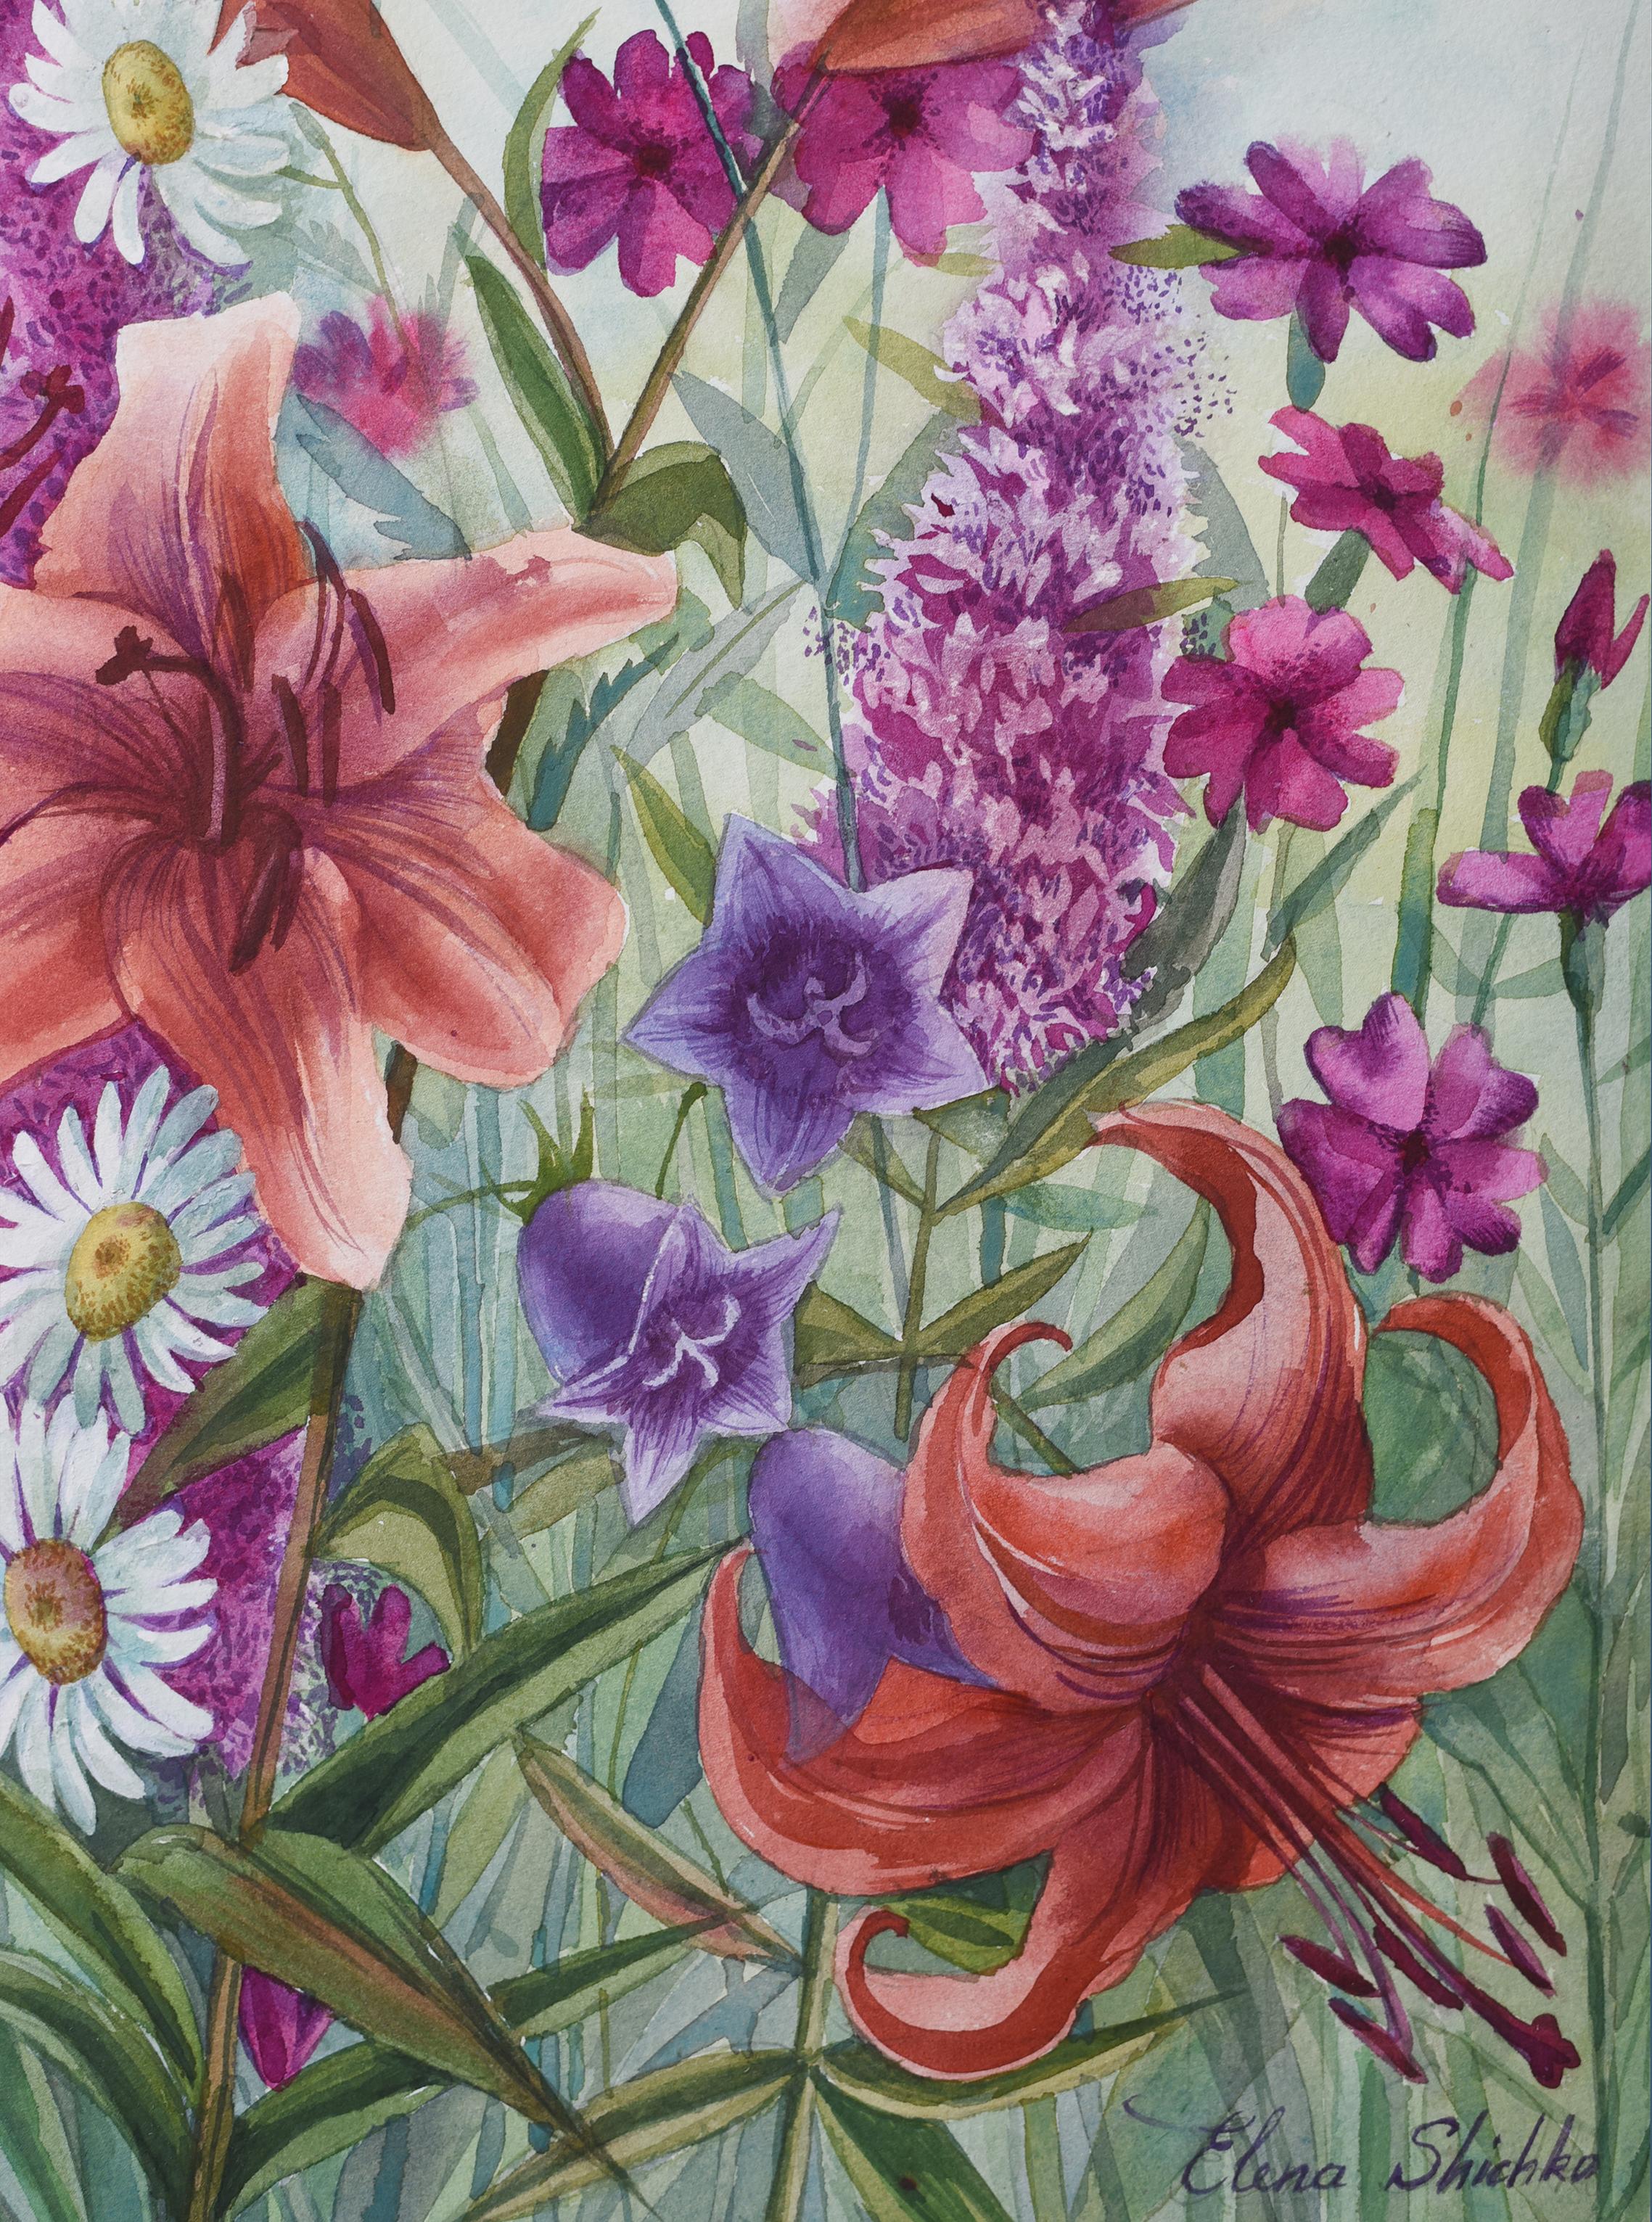 LILIES IN SUMMER GARDEN - Painting by Elena Shichko